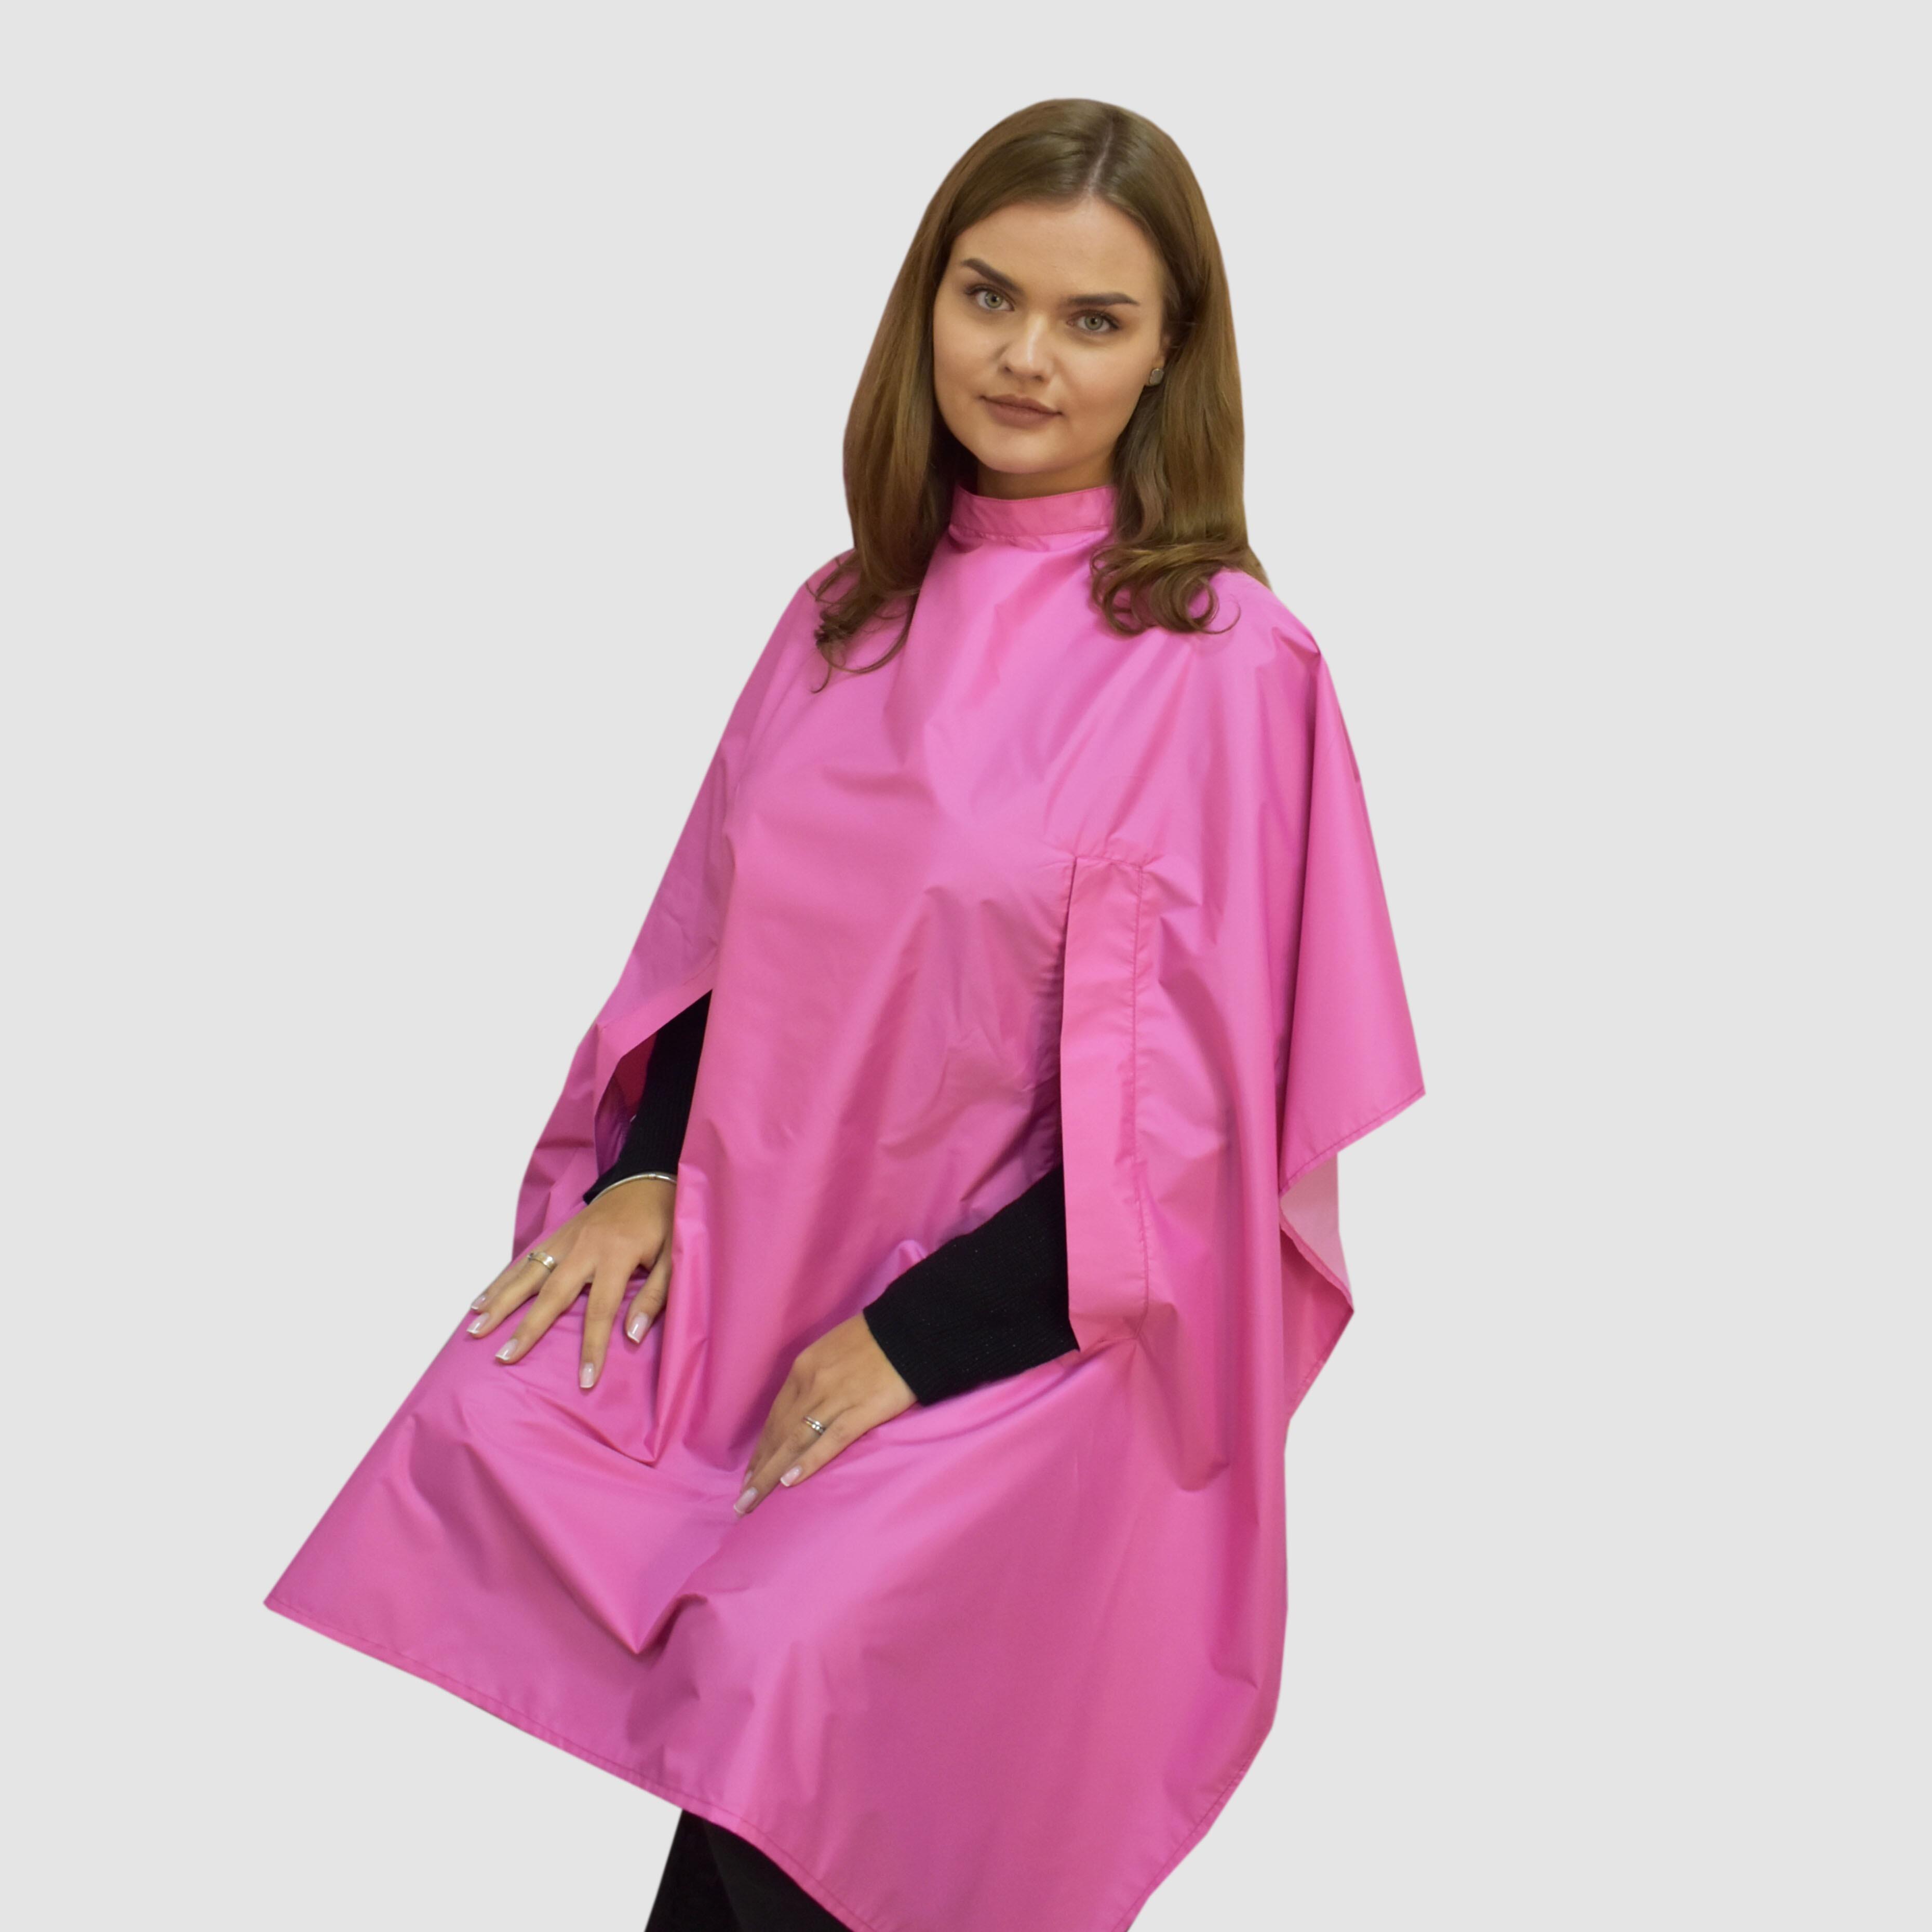 Nibano Hairdressing Gown Pink Barbie with handsplit